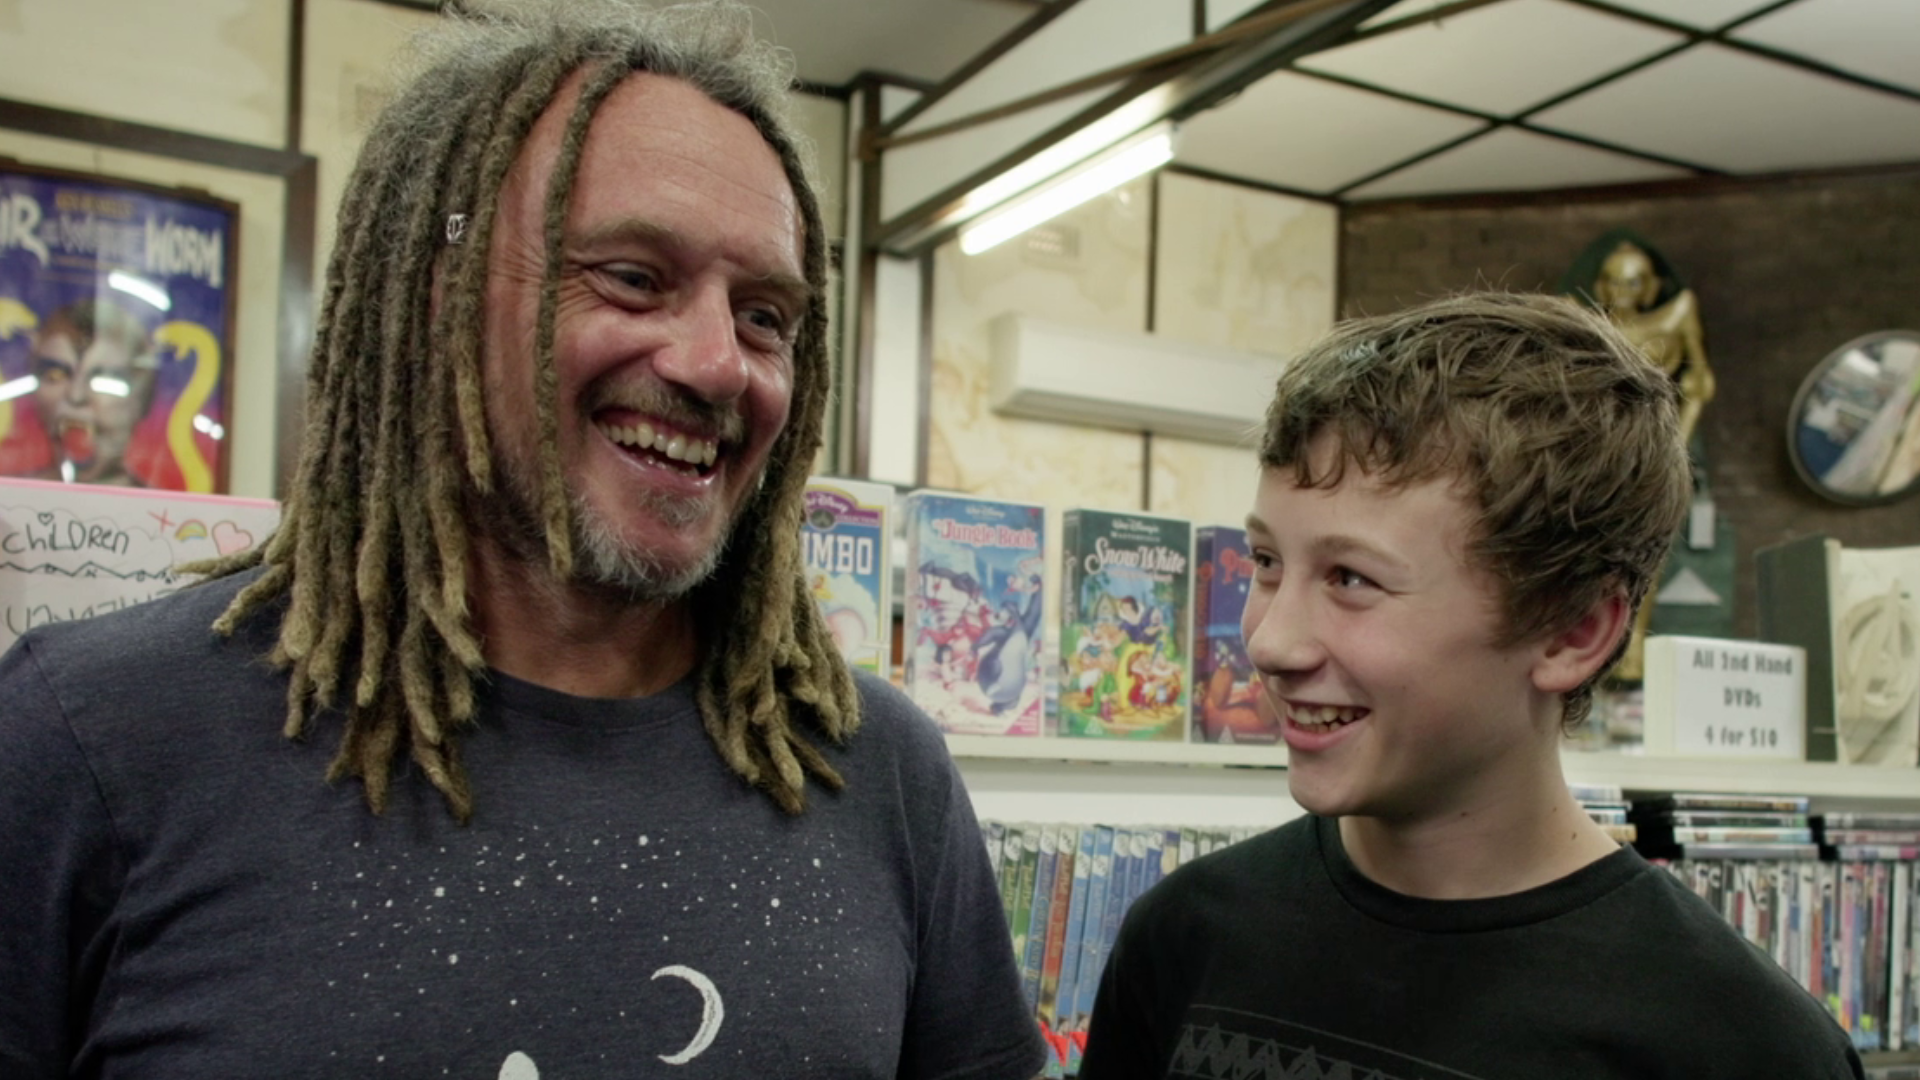 A man and his son laugh together in front of shelves of videos laughing from the documentary Return Chute: The survival of a small town video store.